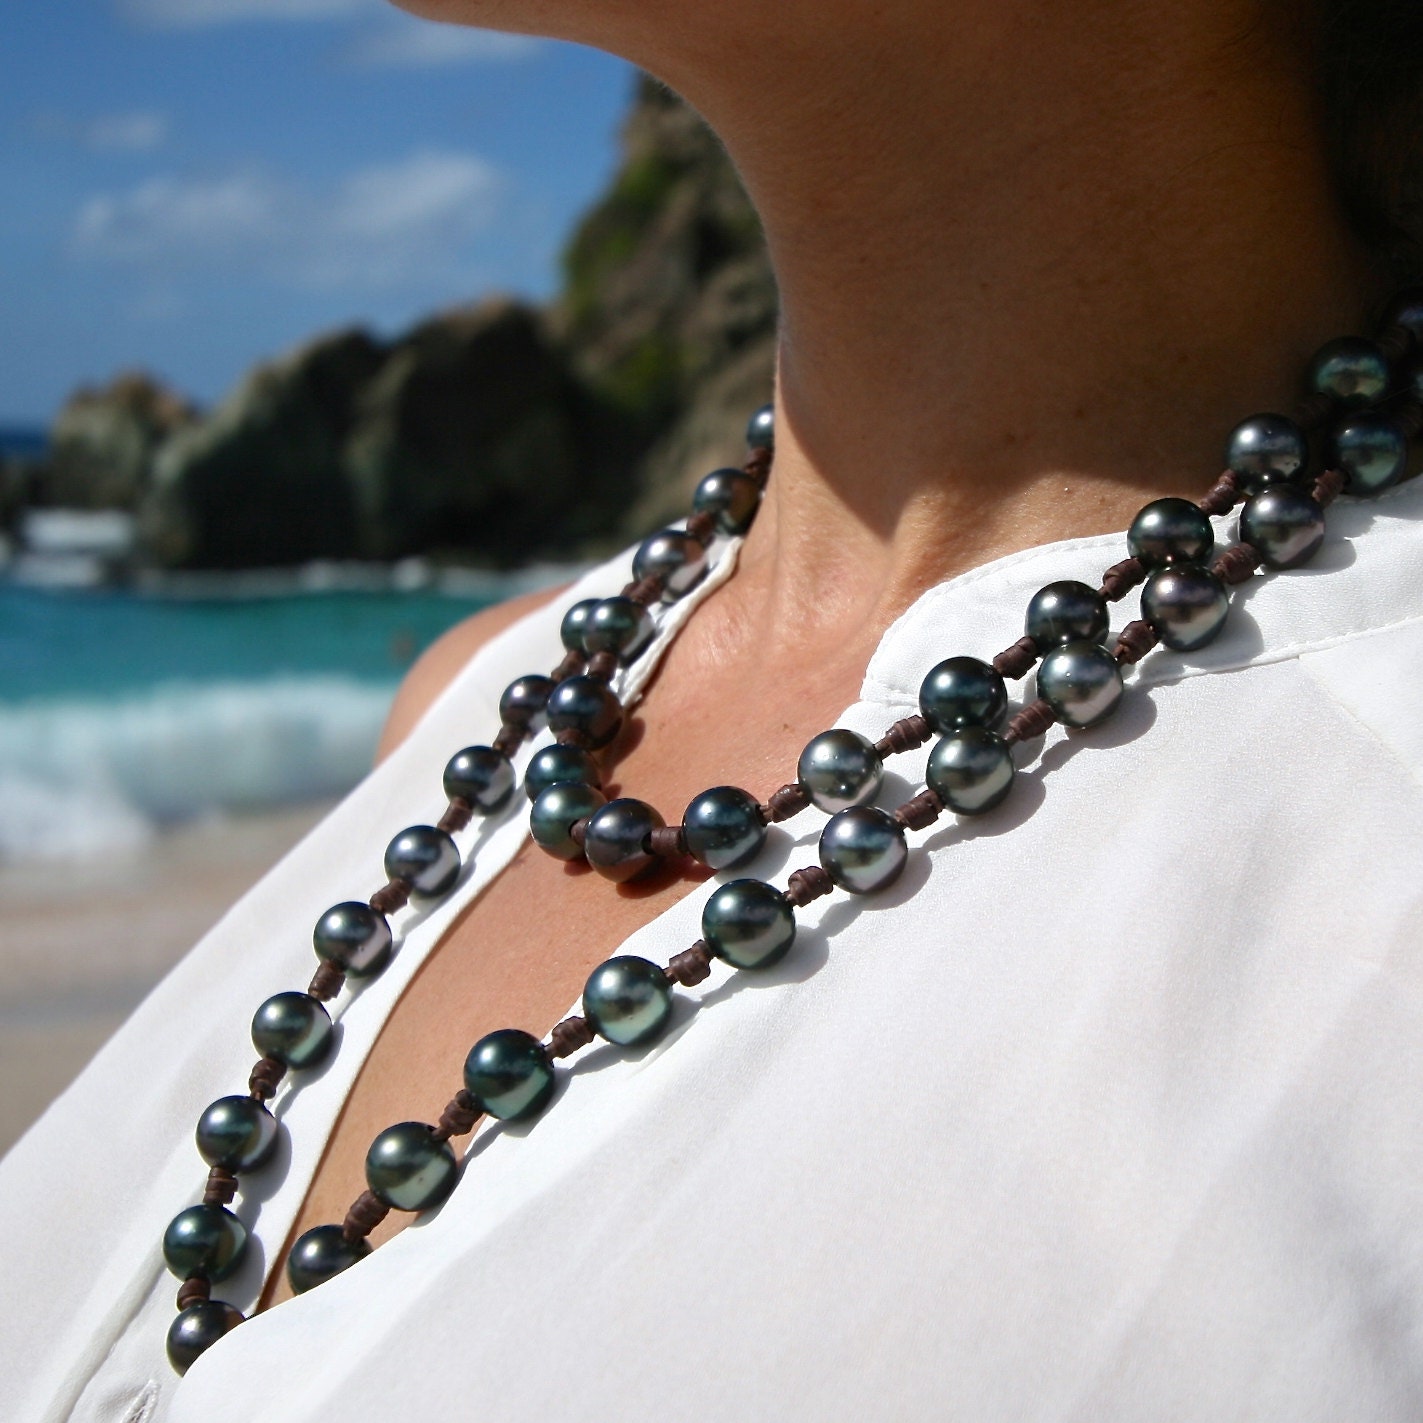 Pearls and Leather Necklace for Women, Seaside Beach Jewelry, Tahitian Black Cultured Pearls, Pearl Choker, Pearl Pendant, St Barts Jewelry.